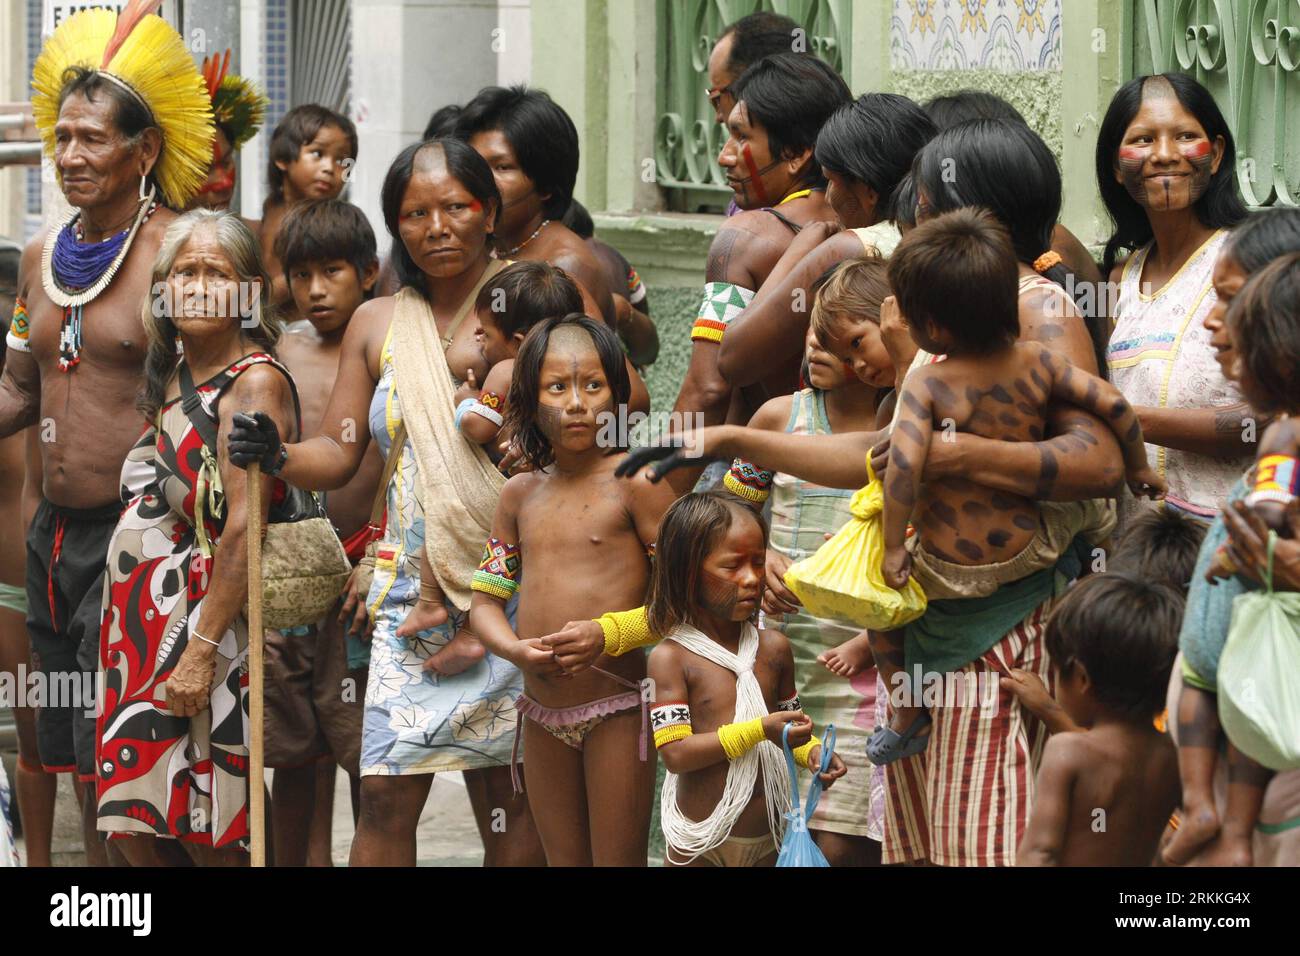 Bildnummer: 56239126  Datum: 01.11.2011  Copyright: imago/Xinhua (111102) -- BELEN, Nov. 2, 2011 (Xinhua) -- Members of the Kayapo ethnic group from the Sao Felix do Xingu municipality participate in a rally to demand public transportation services in front of the Justice and Human Rights Secretary in Belen, capital of Para state, Brazil, Nov. 1, 2011. (Xinhua/Tarso Sarraf)(ctt) BRASIL-BELEN-SOCIETY-PROTEST PUBLICATIONxNOTxINxCHN Gesellschaft Indianer x0x xsk 2011 quer premiumd      56239126 Date 01 11 2011 Copyright Imago XINHUA  Belen Nov 2 2011 XINHUA Members of The Kayapo Ethnic Group from Stock Photo